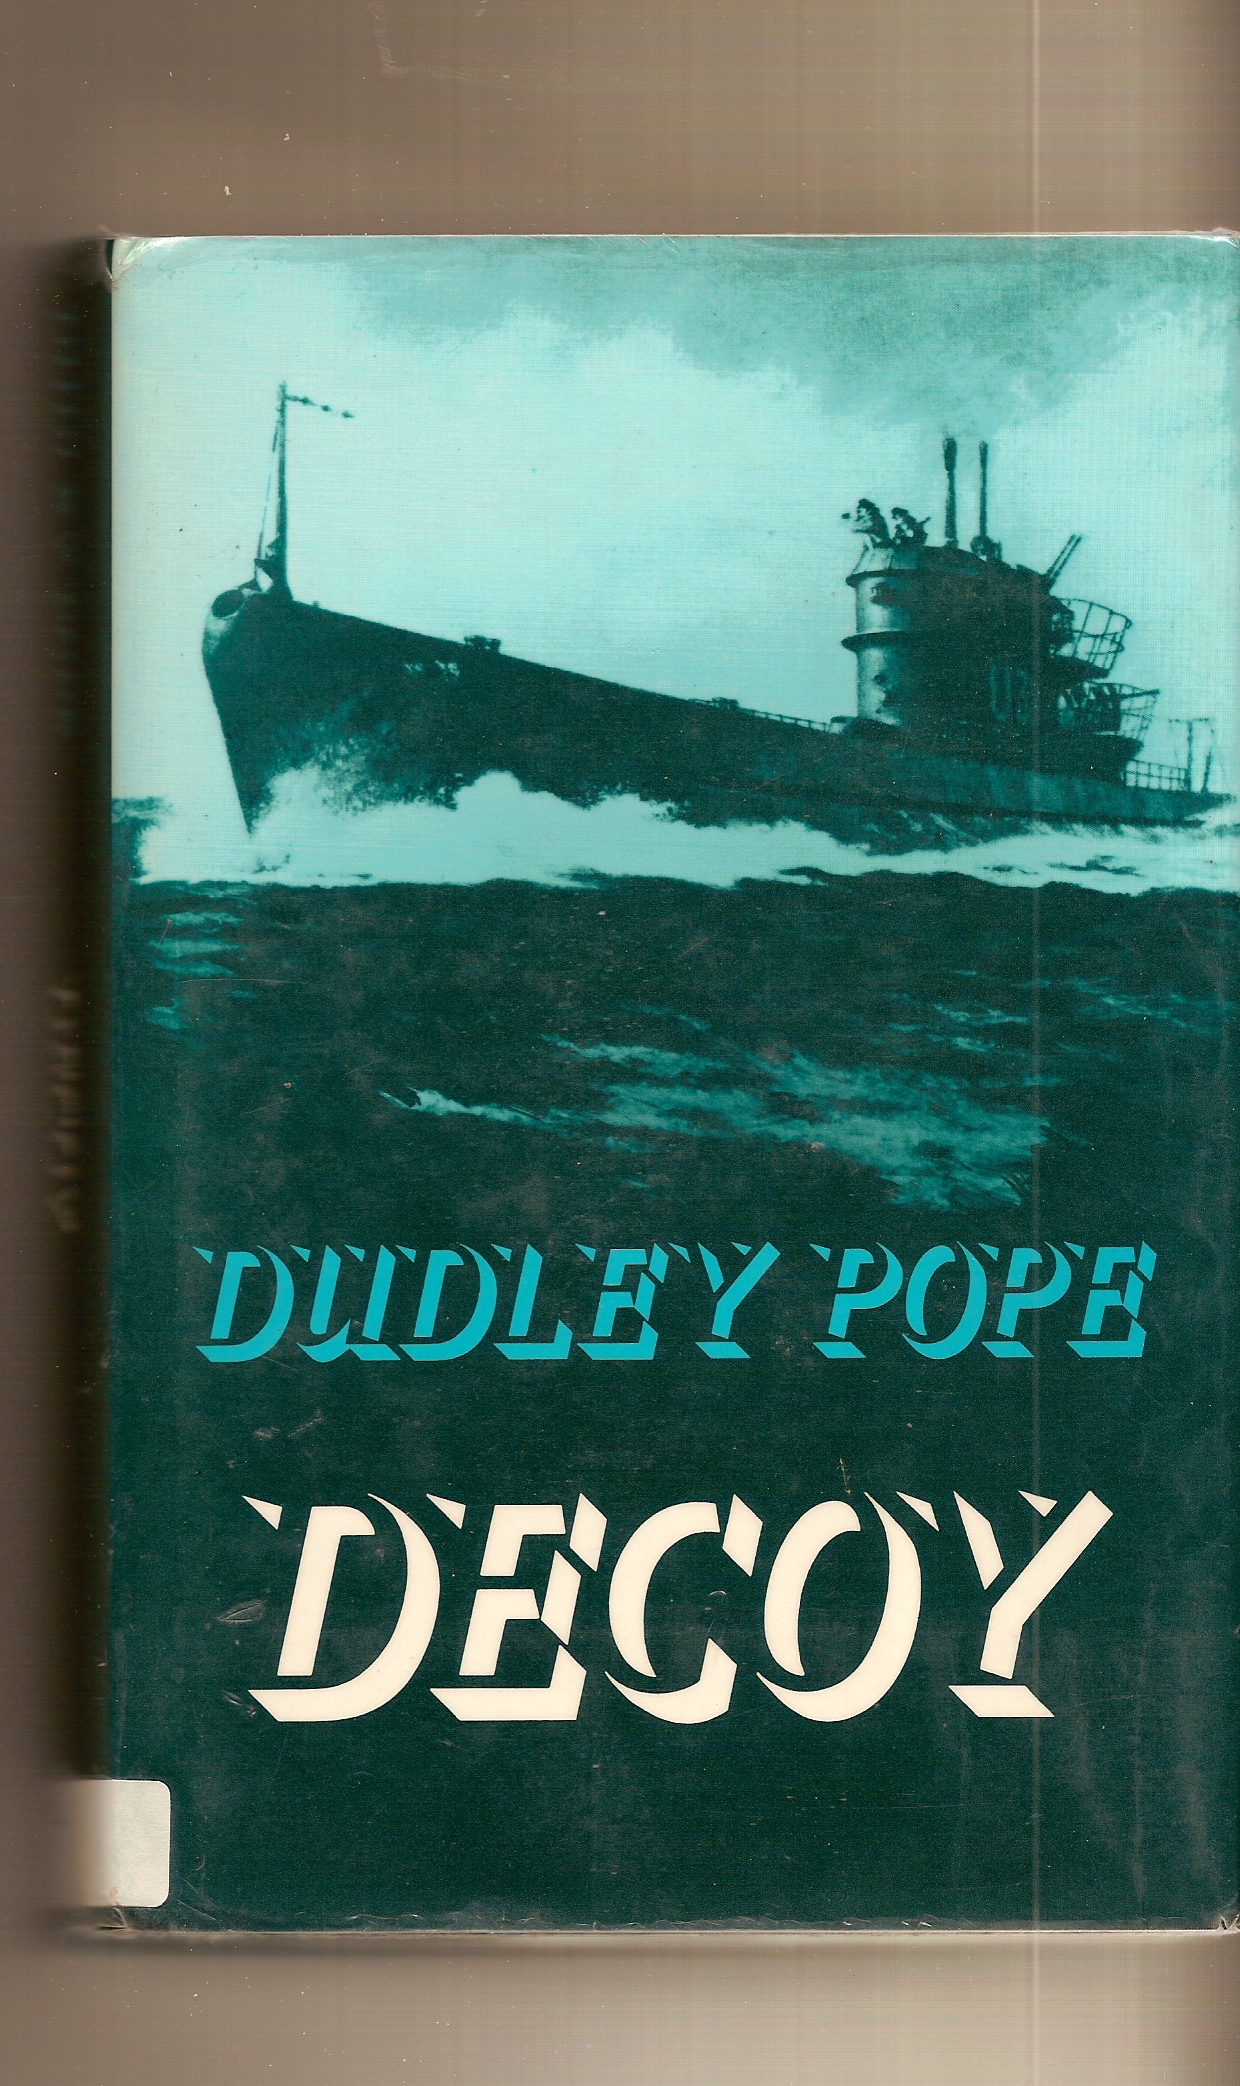 POPE, DUDLEY - Decoy